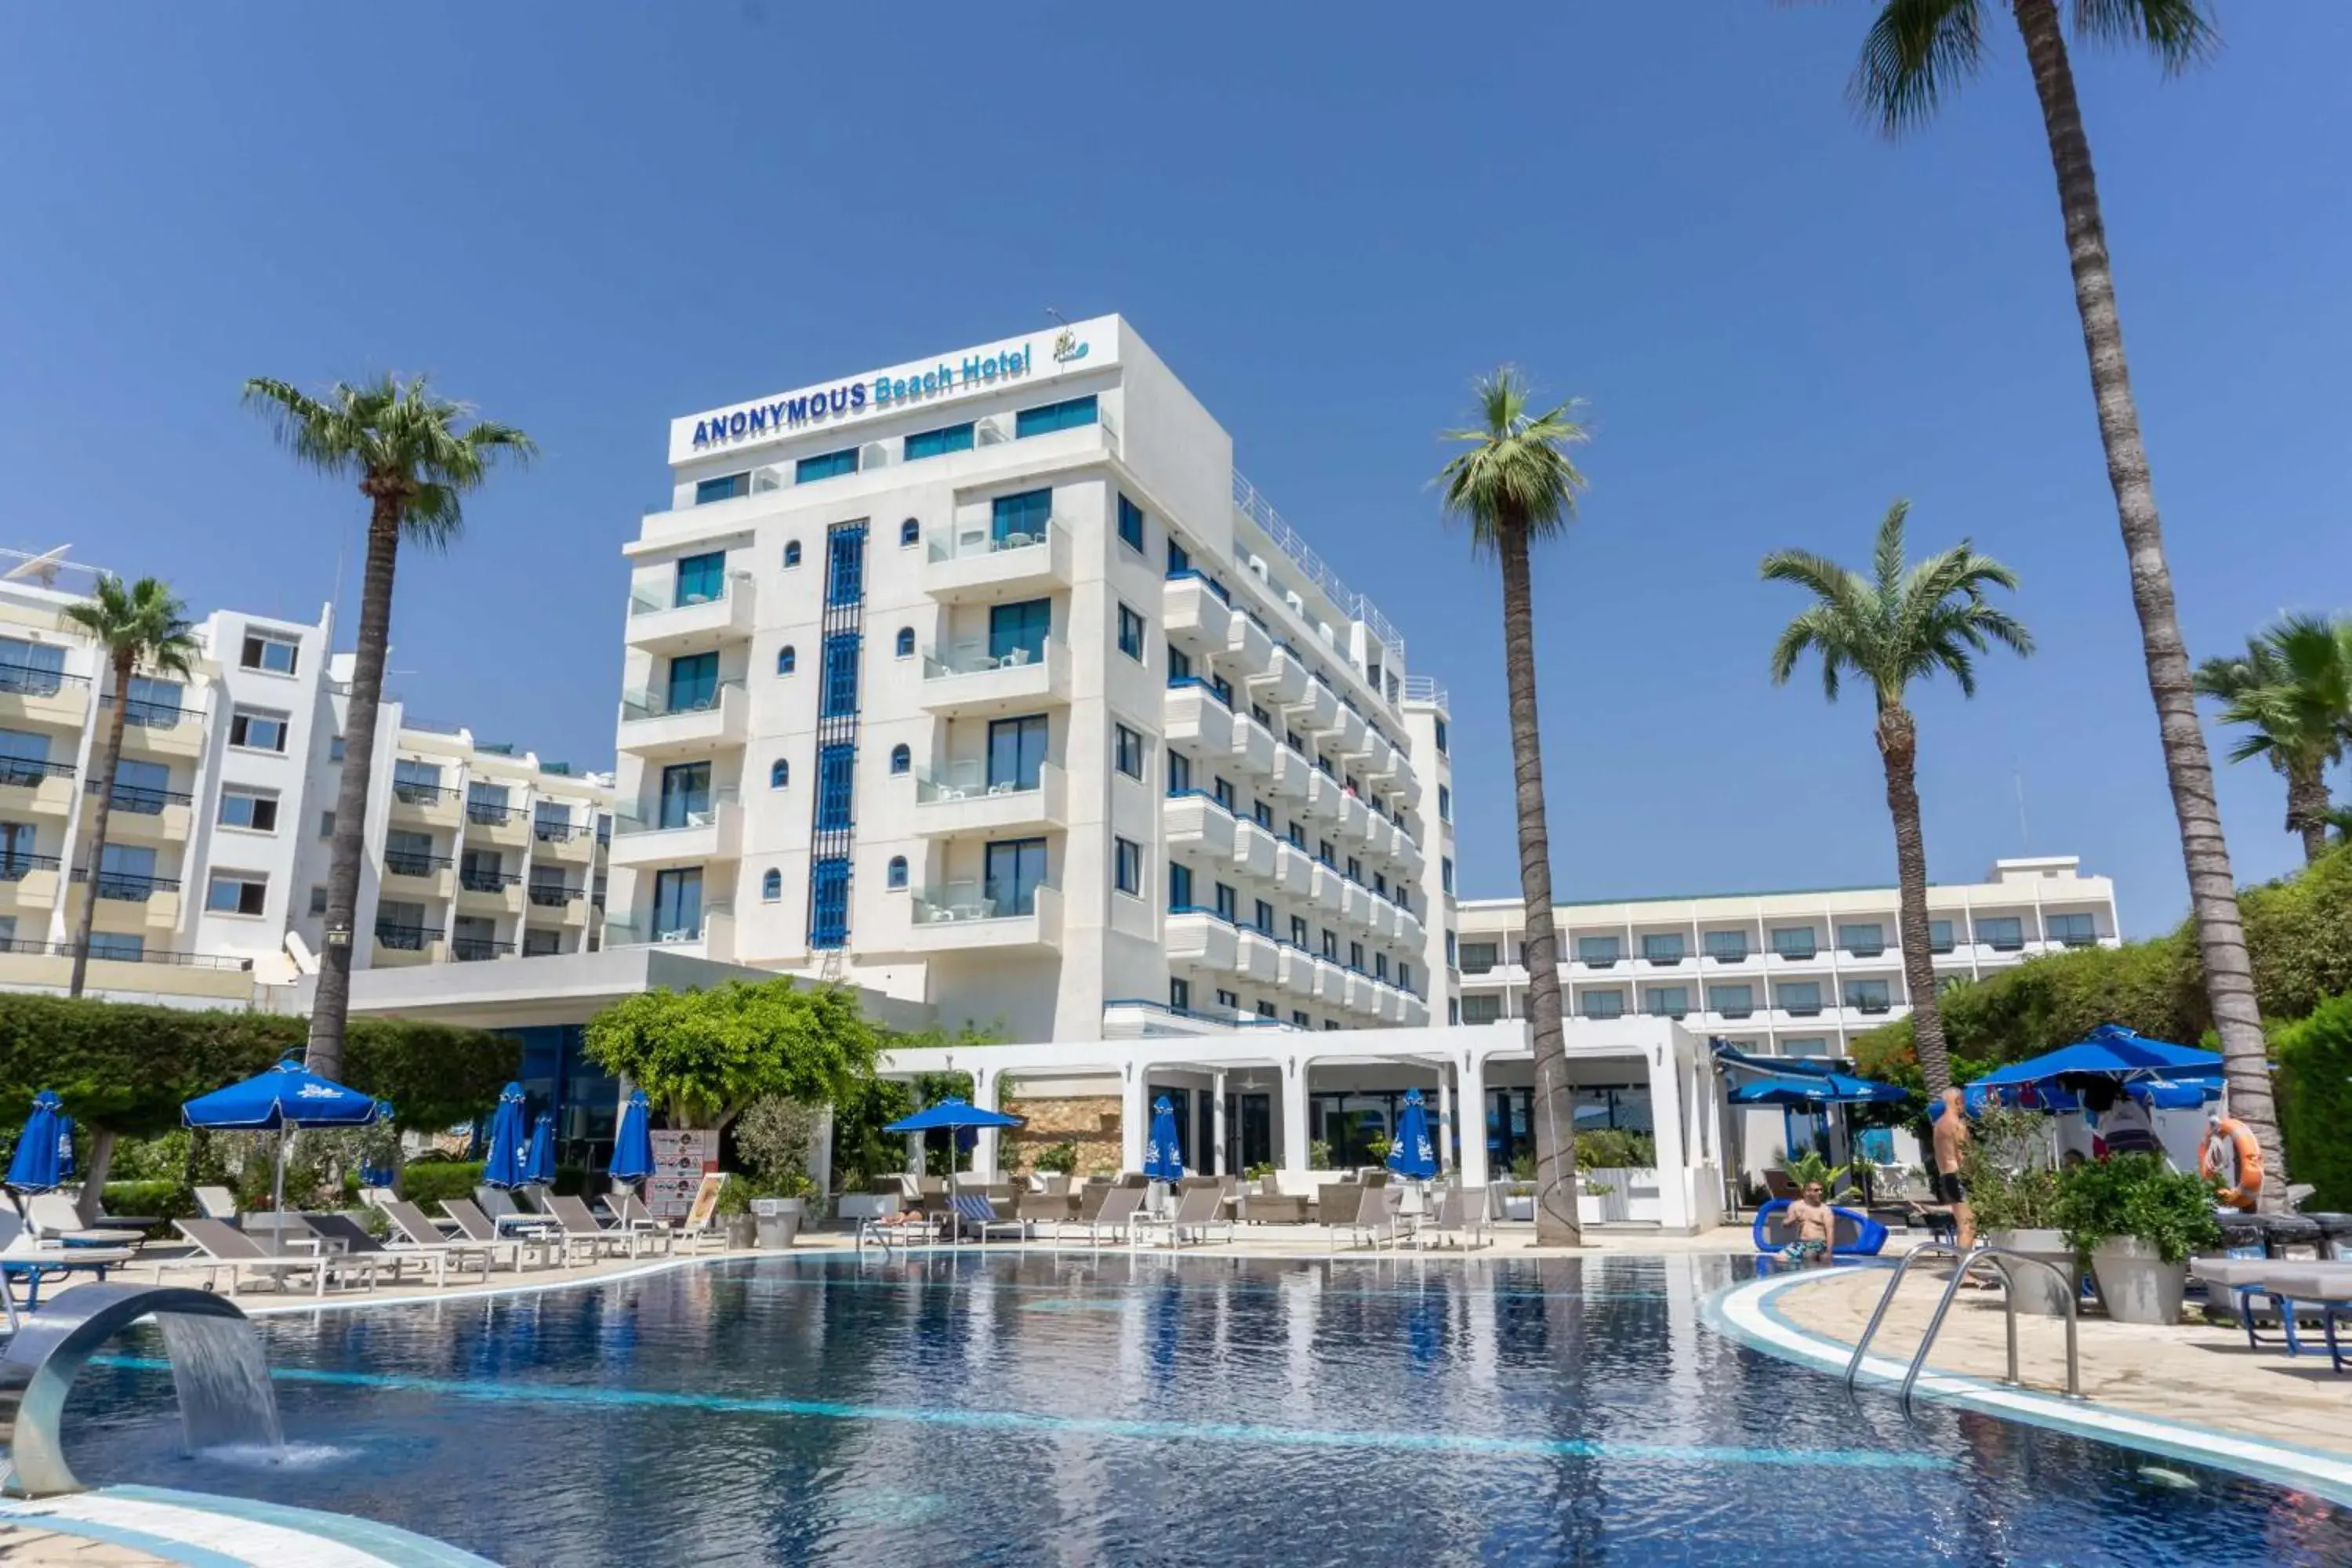 Property Building in Anonymous Beach Hotel (Adults 16+)